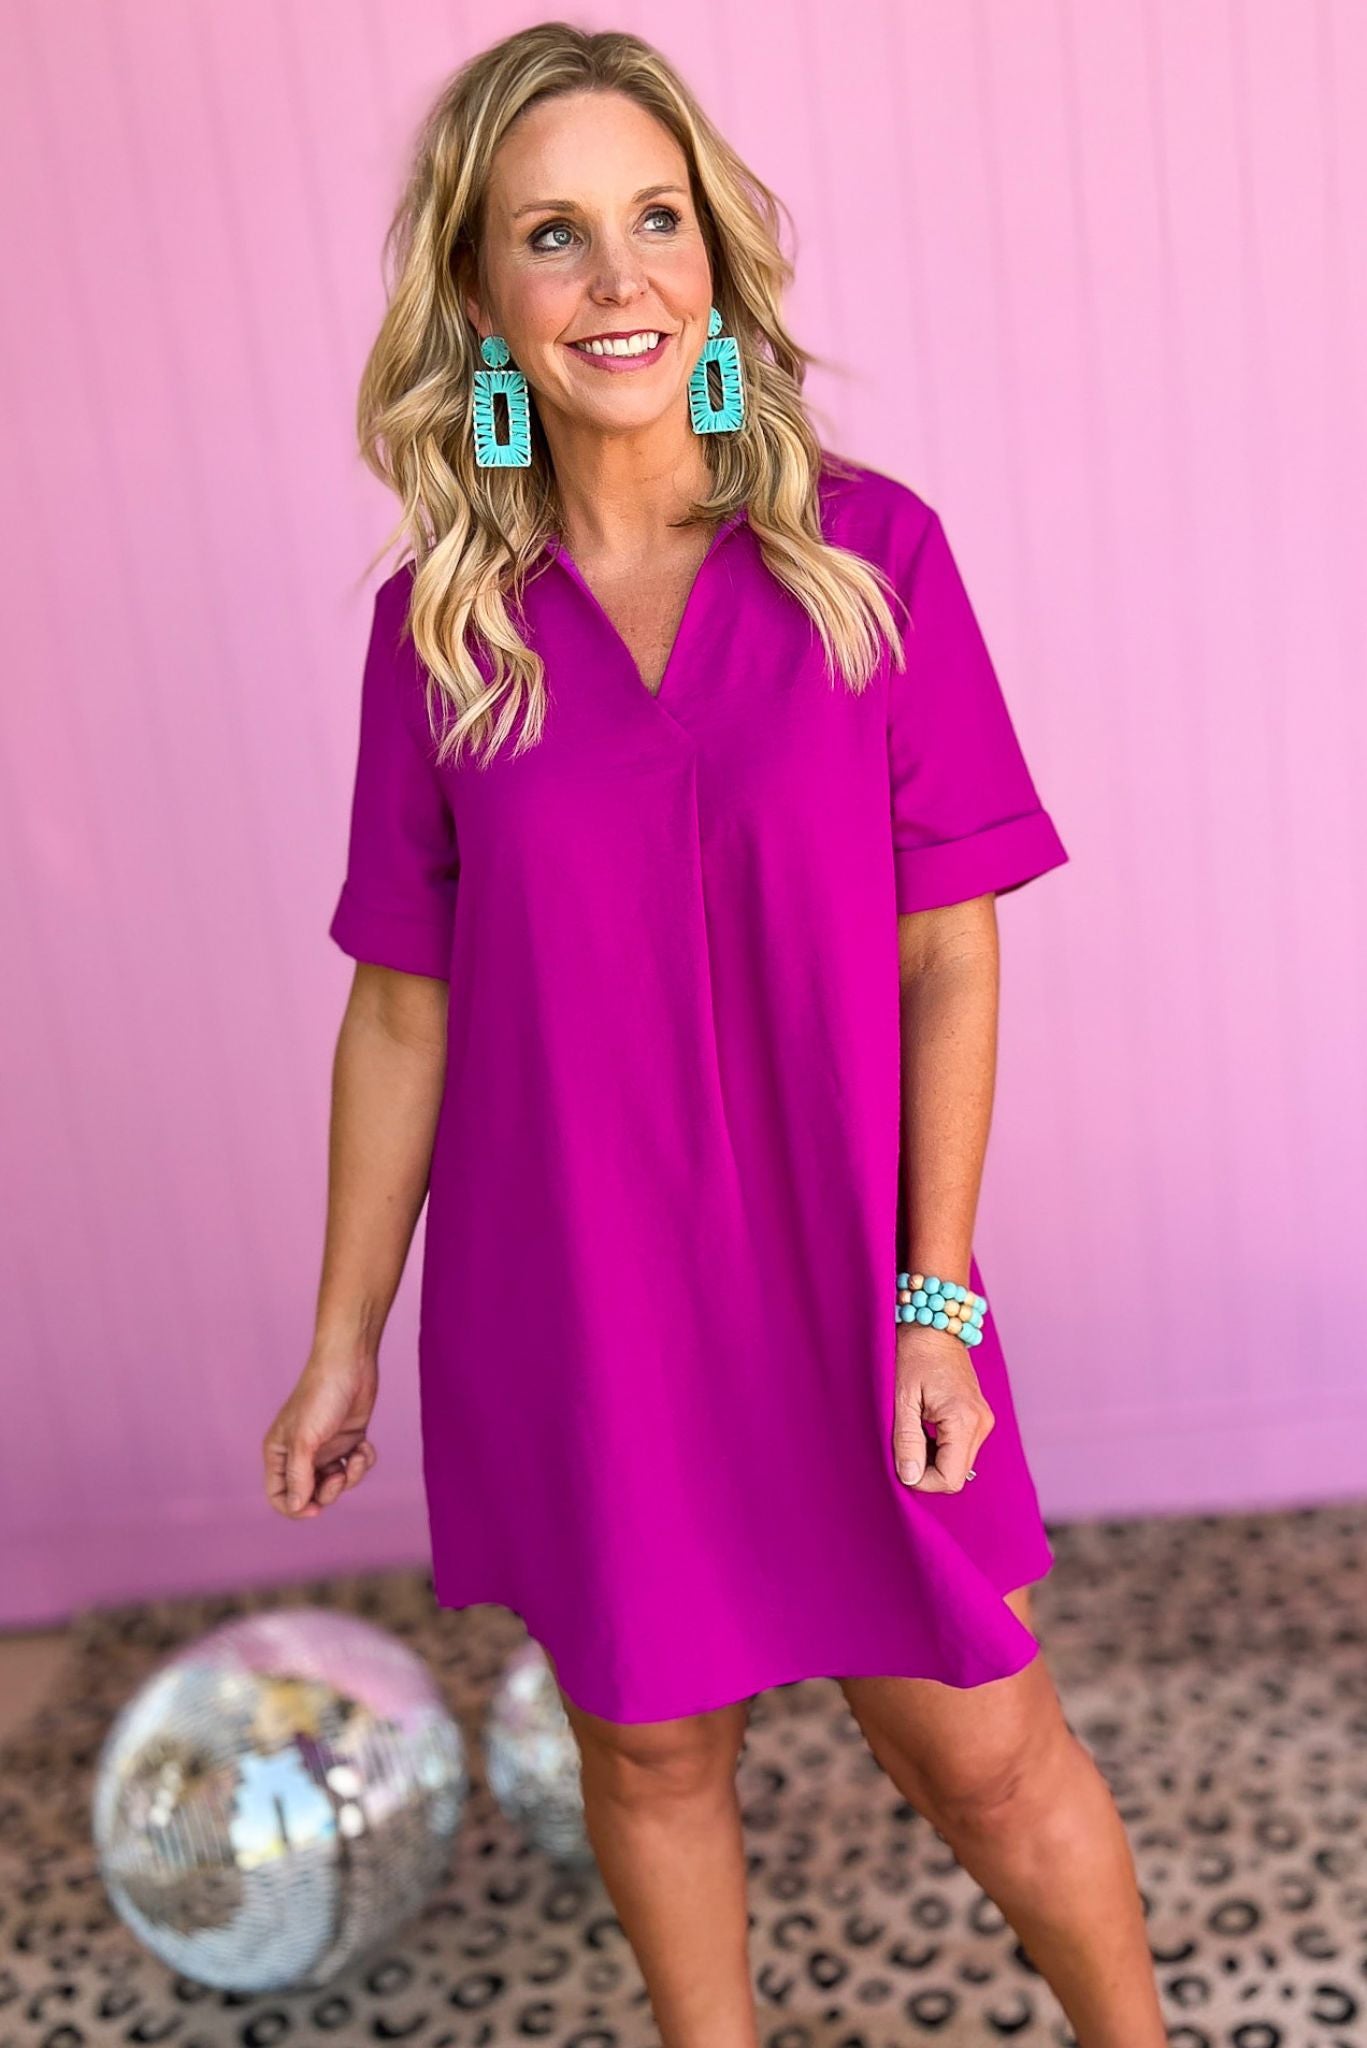 SSYS fuchsia Collared Crepe Dress, collar detail, shift dress, v neck, must have, office look, shop style your senses by mallory fitzsimmons